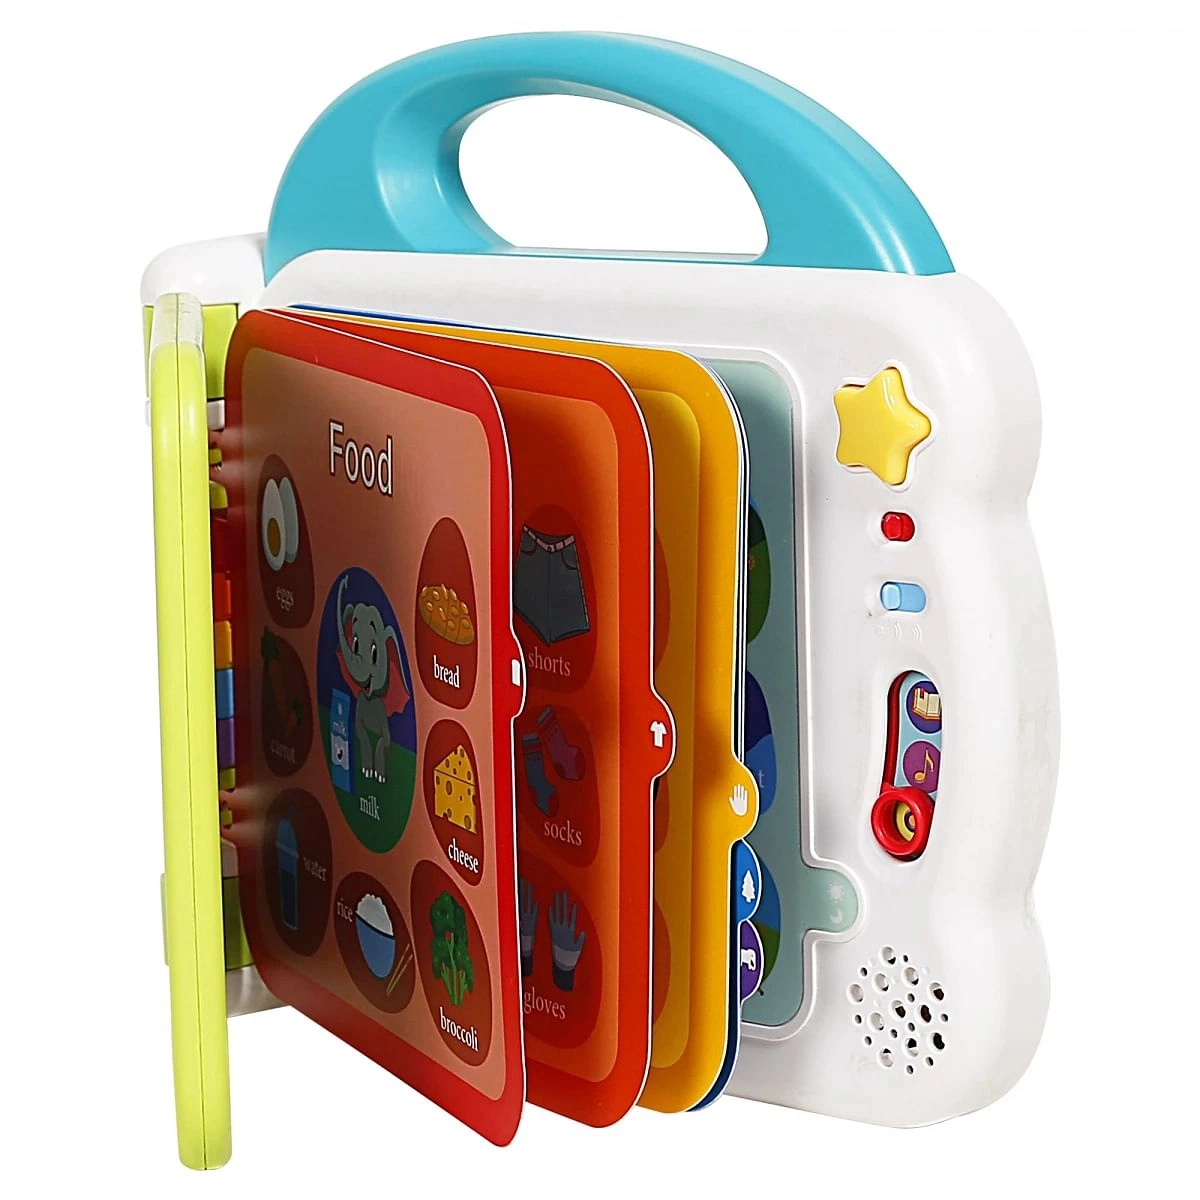 Shooting Star Teach Words Book for Kids, 108 Words, 3 Learning Modes, 12 Subjects, Comes with Bluetooth Function, 12M+, Multicolour